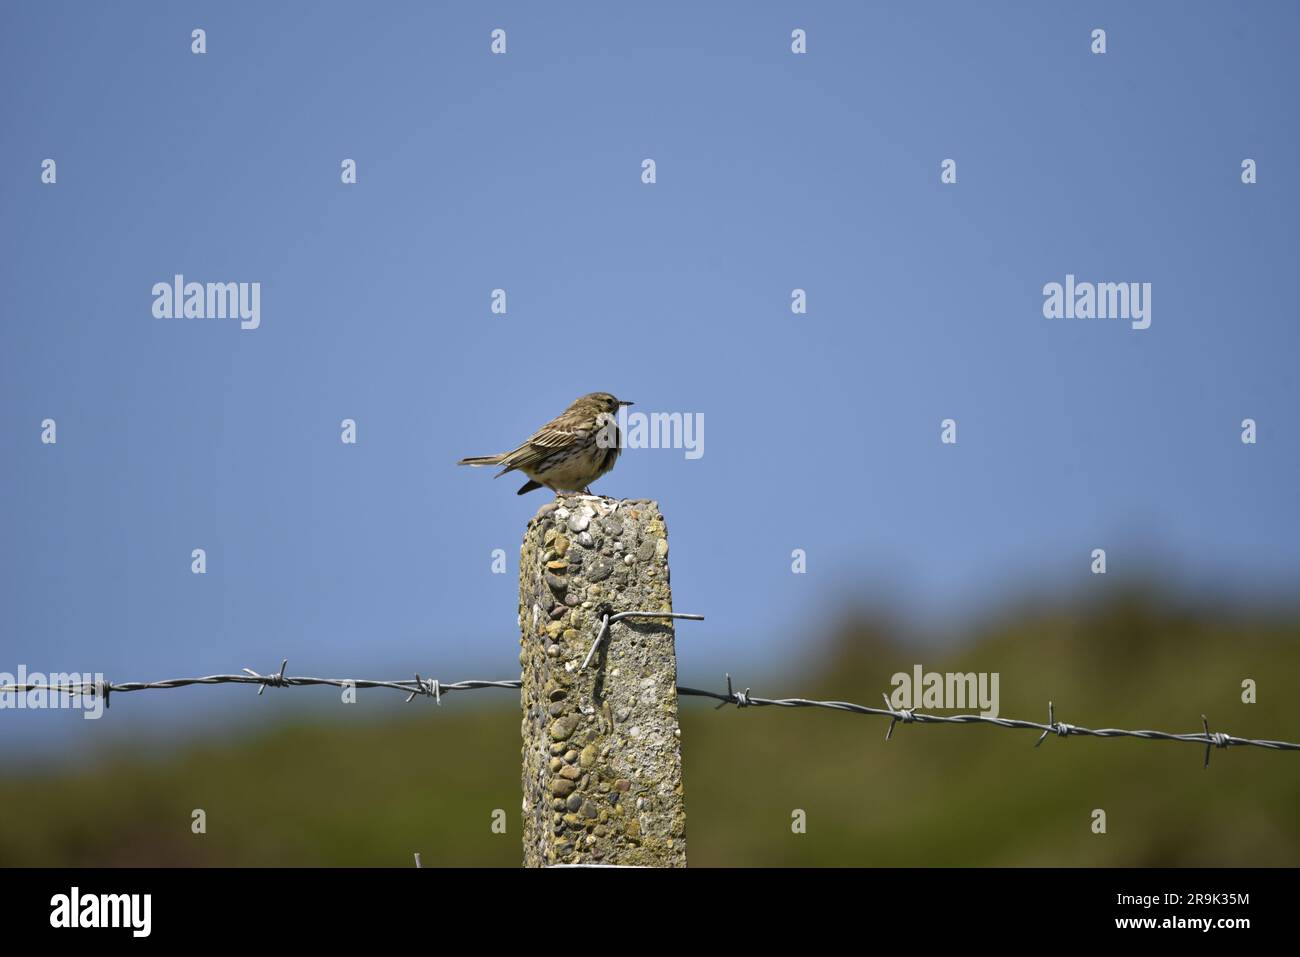 Meadow Pipit (Anthus pratensis) Perched in Right-Profile on Top of Barbed Wire Stone Fence Post against Scrub and Blue Sky Background in the UK Stock Photo